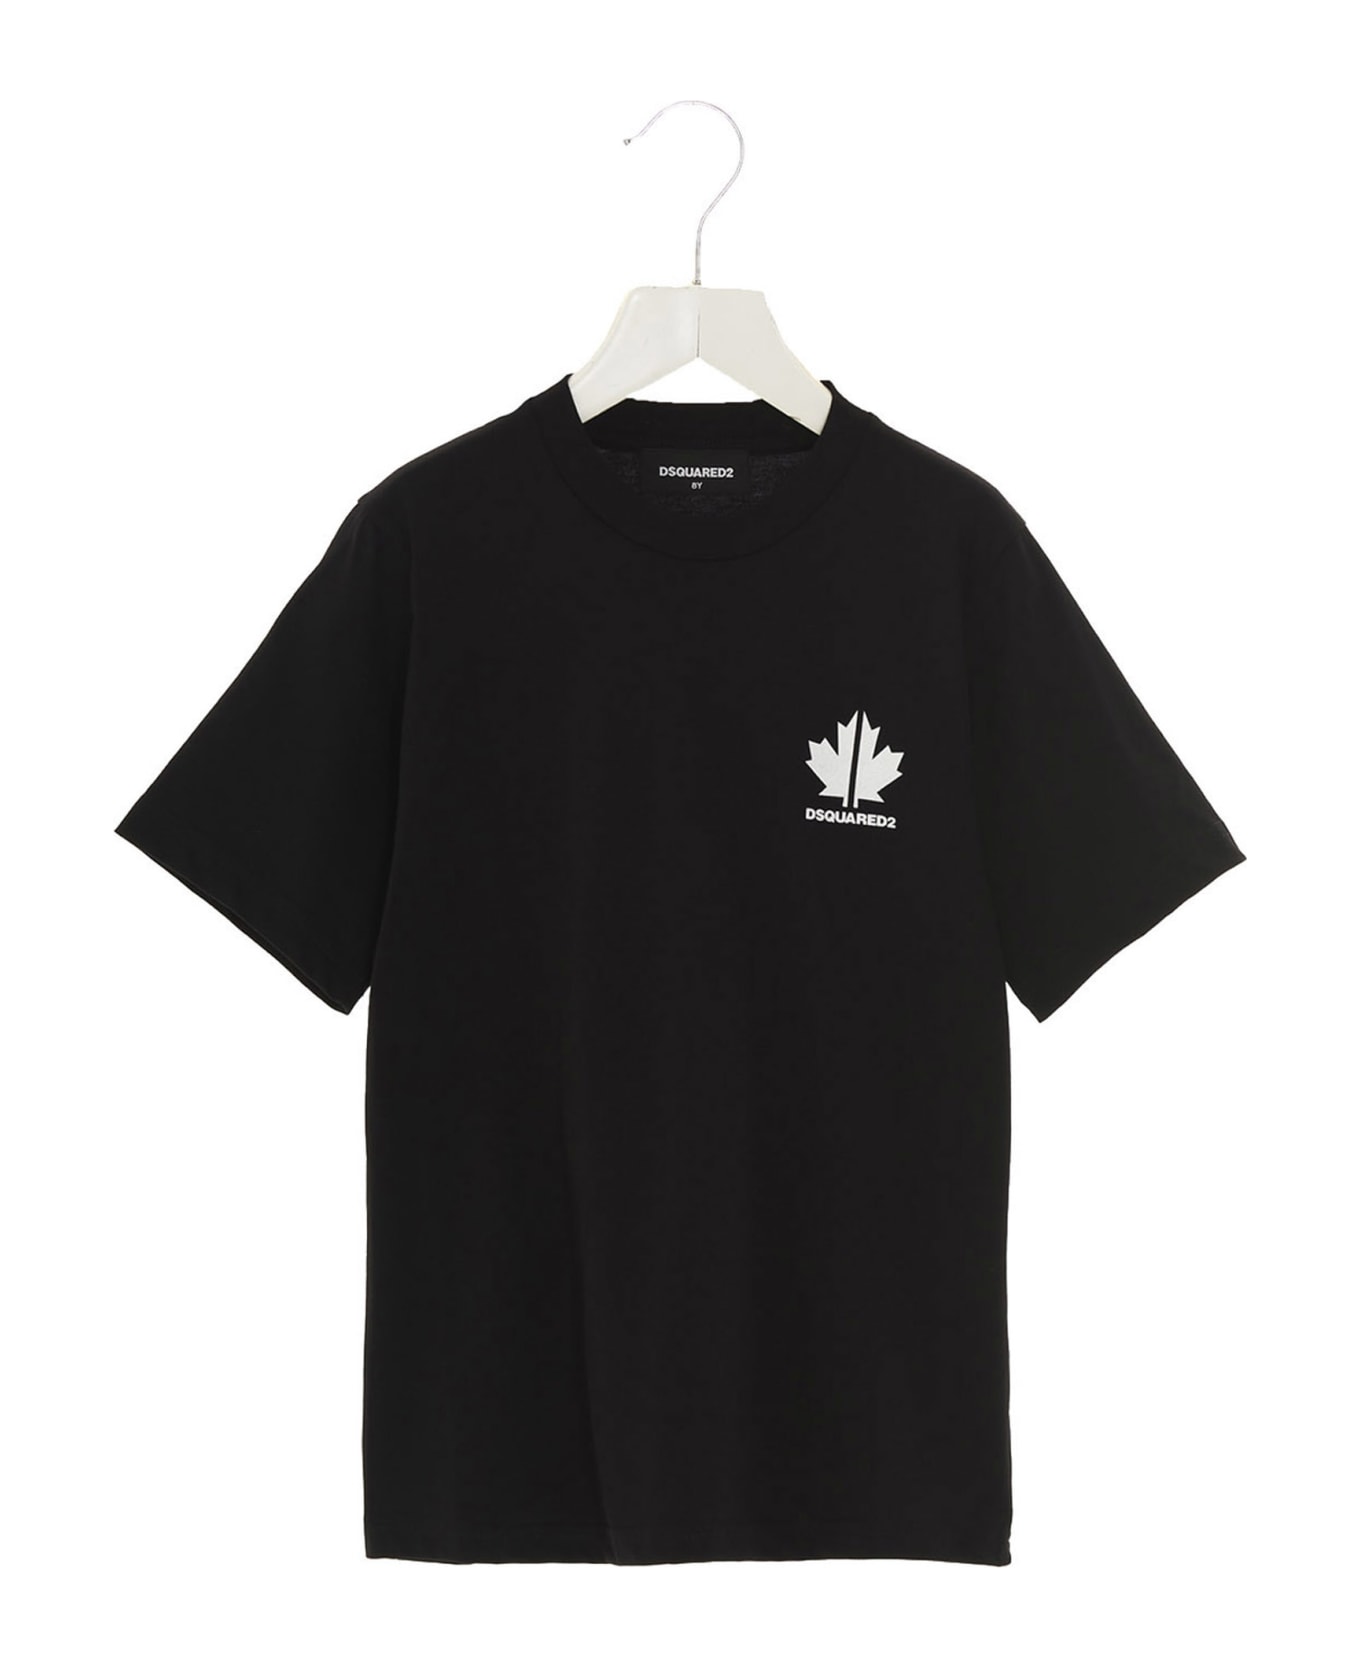 Dsquared2 'slouch' T-shirt - Black  